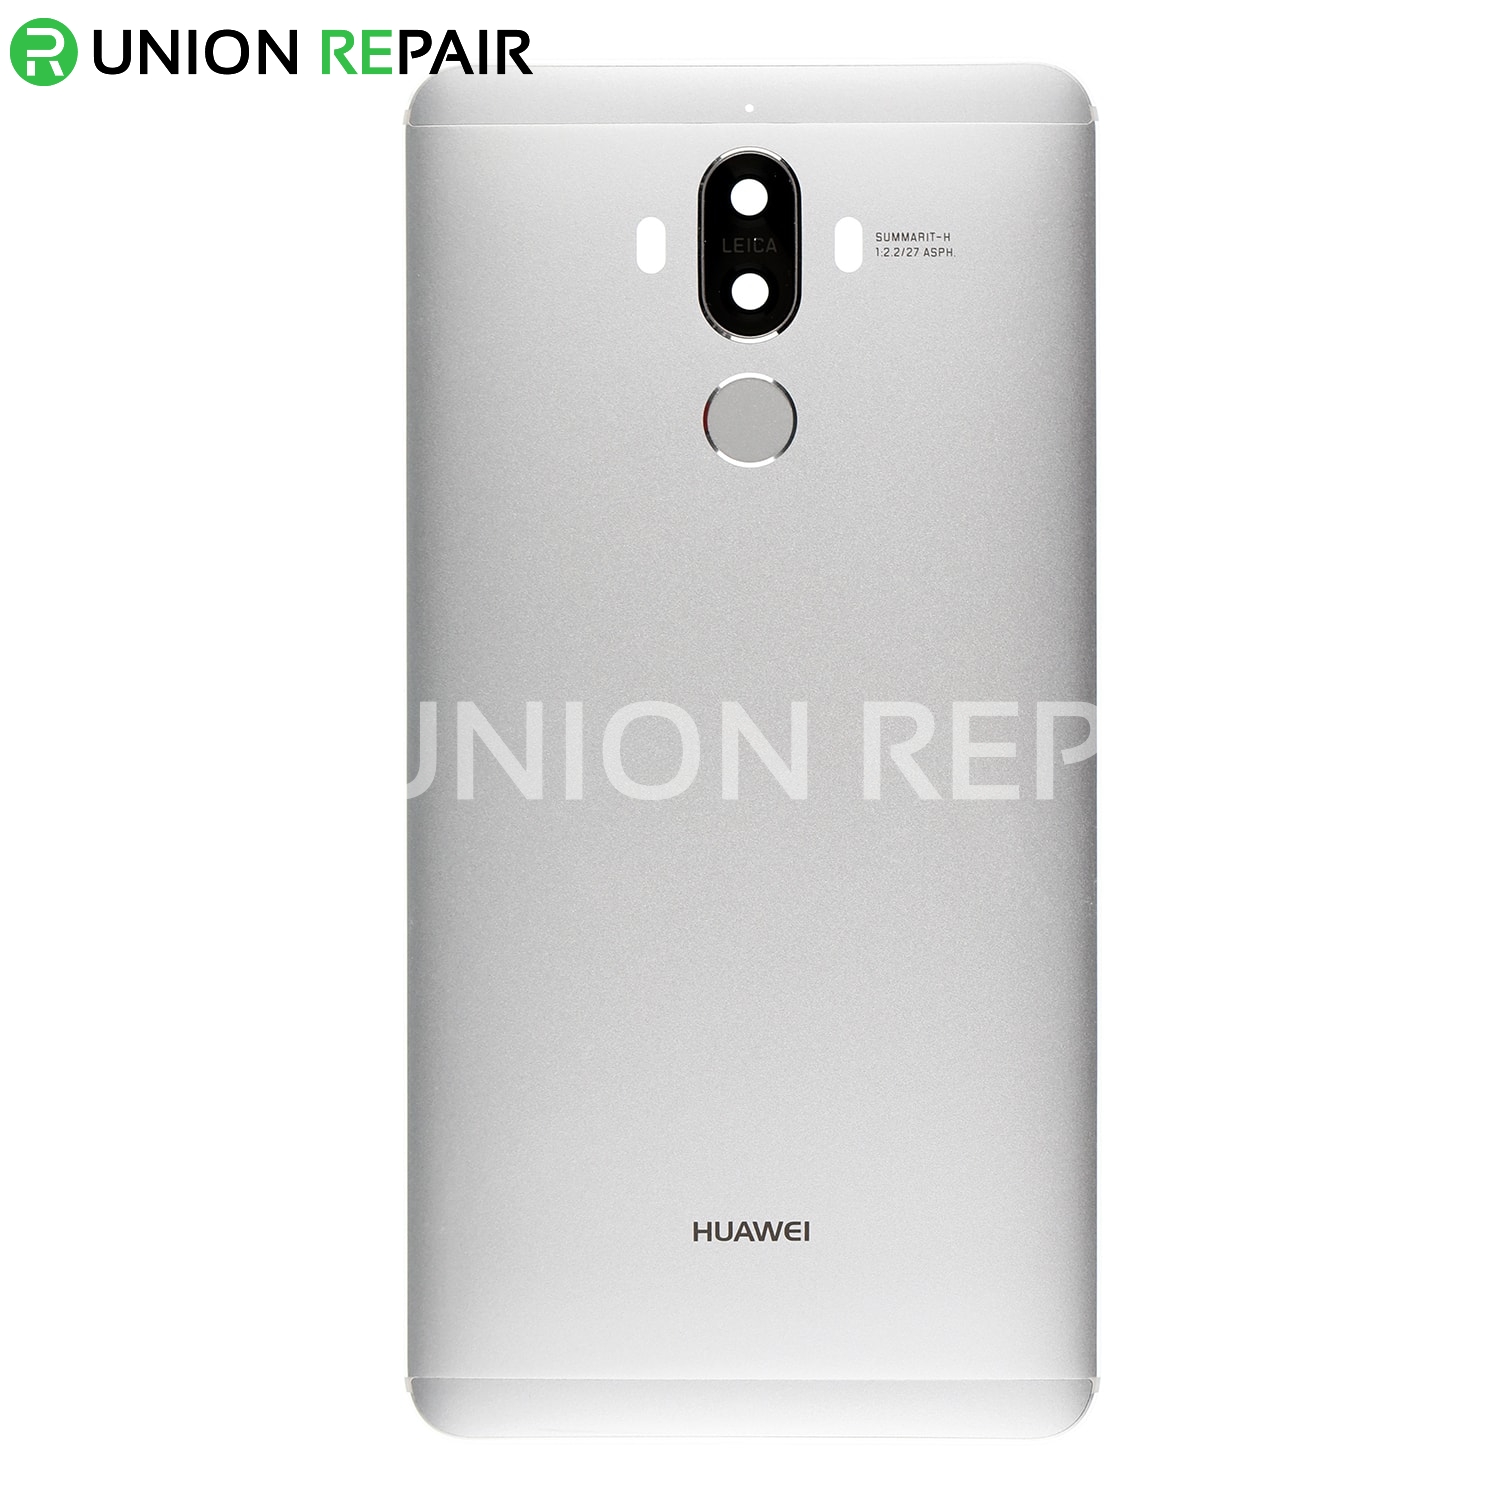 Replacement for Huawei Mate 9 Back Cover with Fingerprint Sensor - Silver